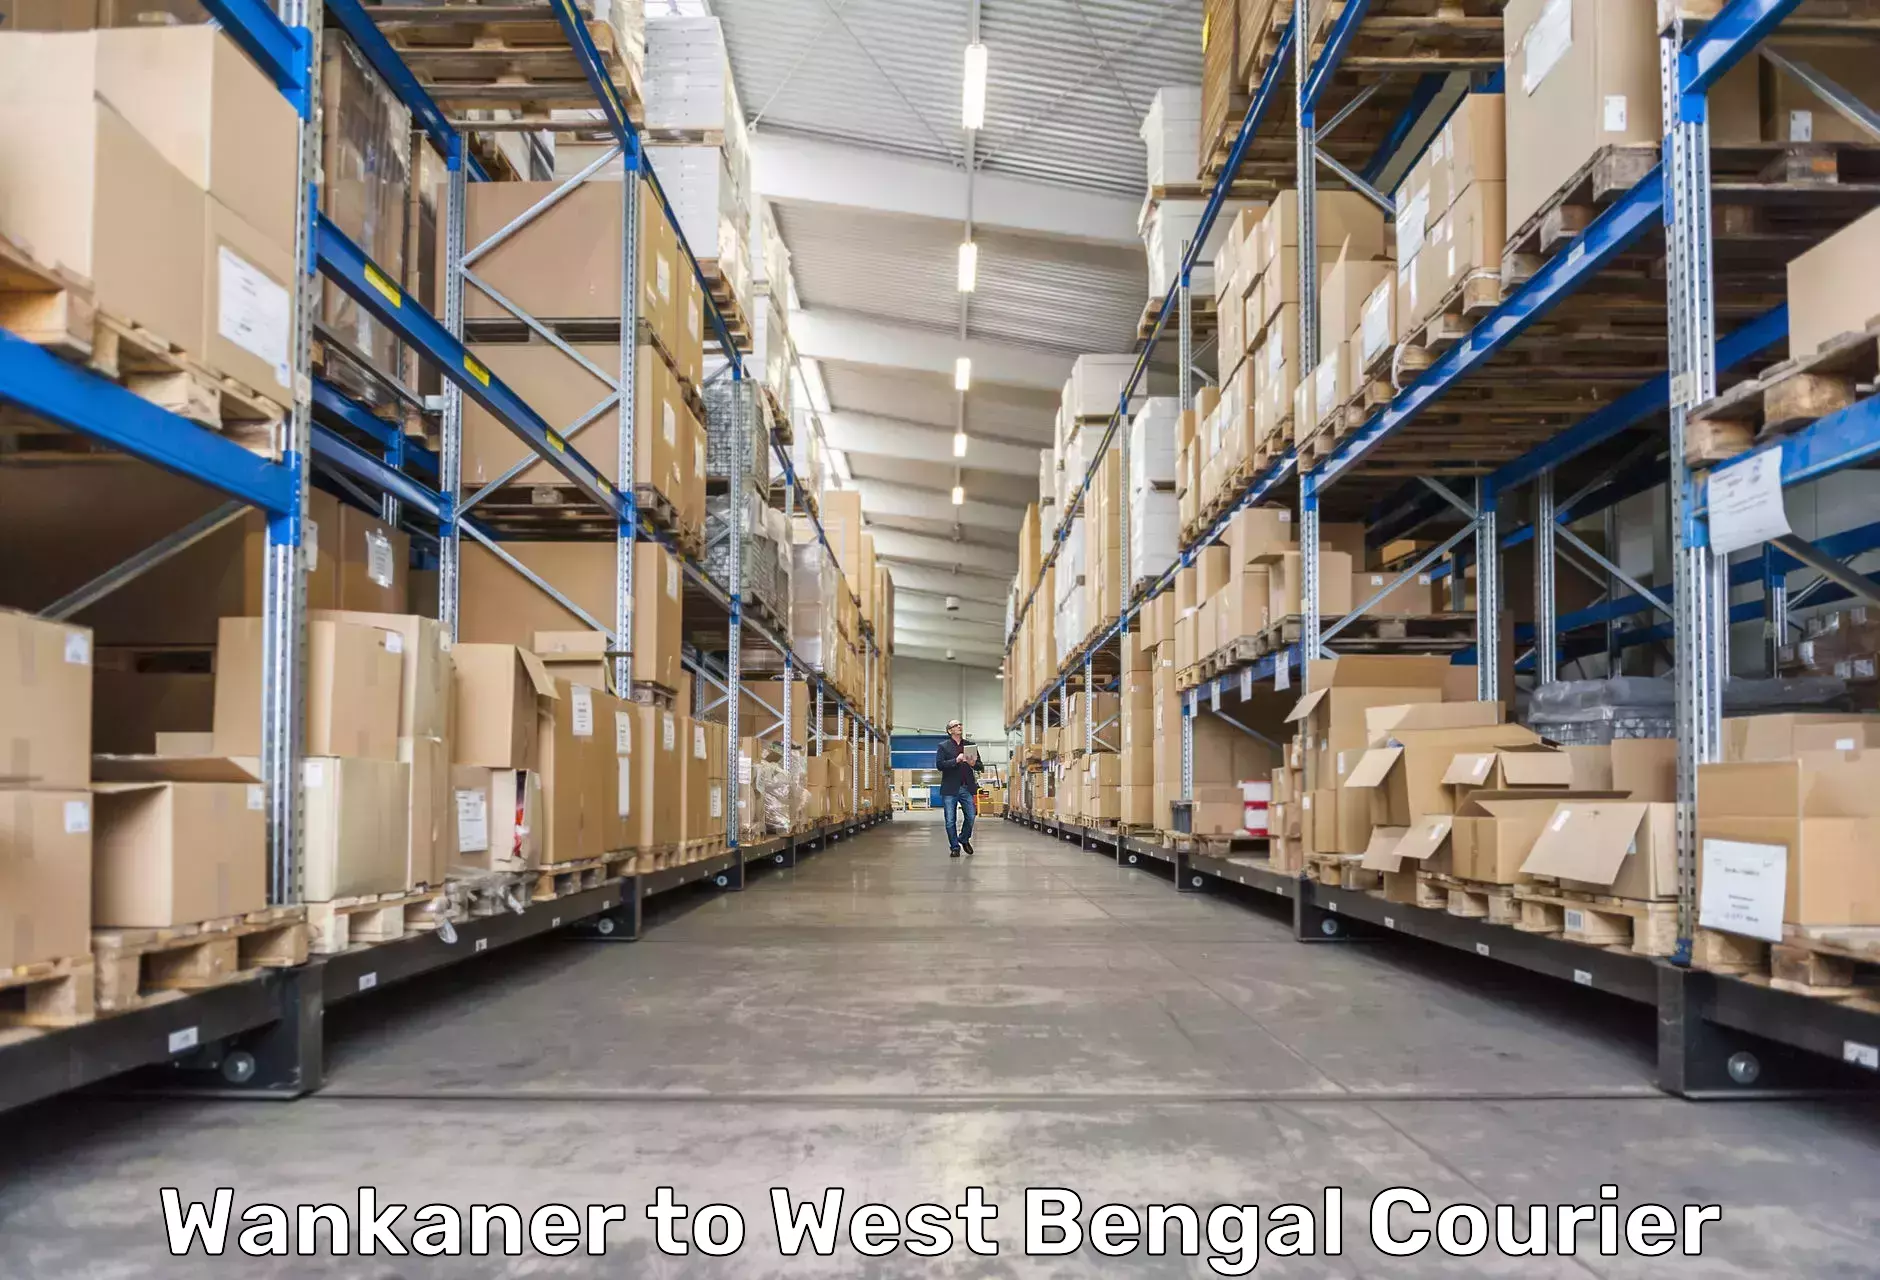 Global shipping networks Wankaner to West Bengal